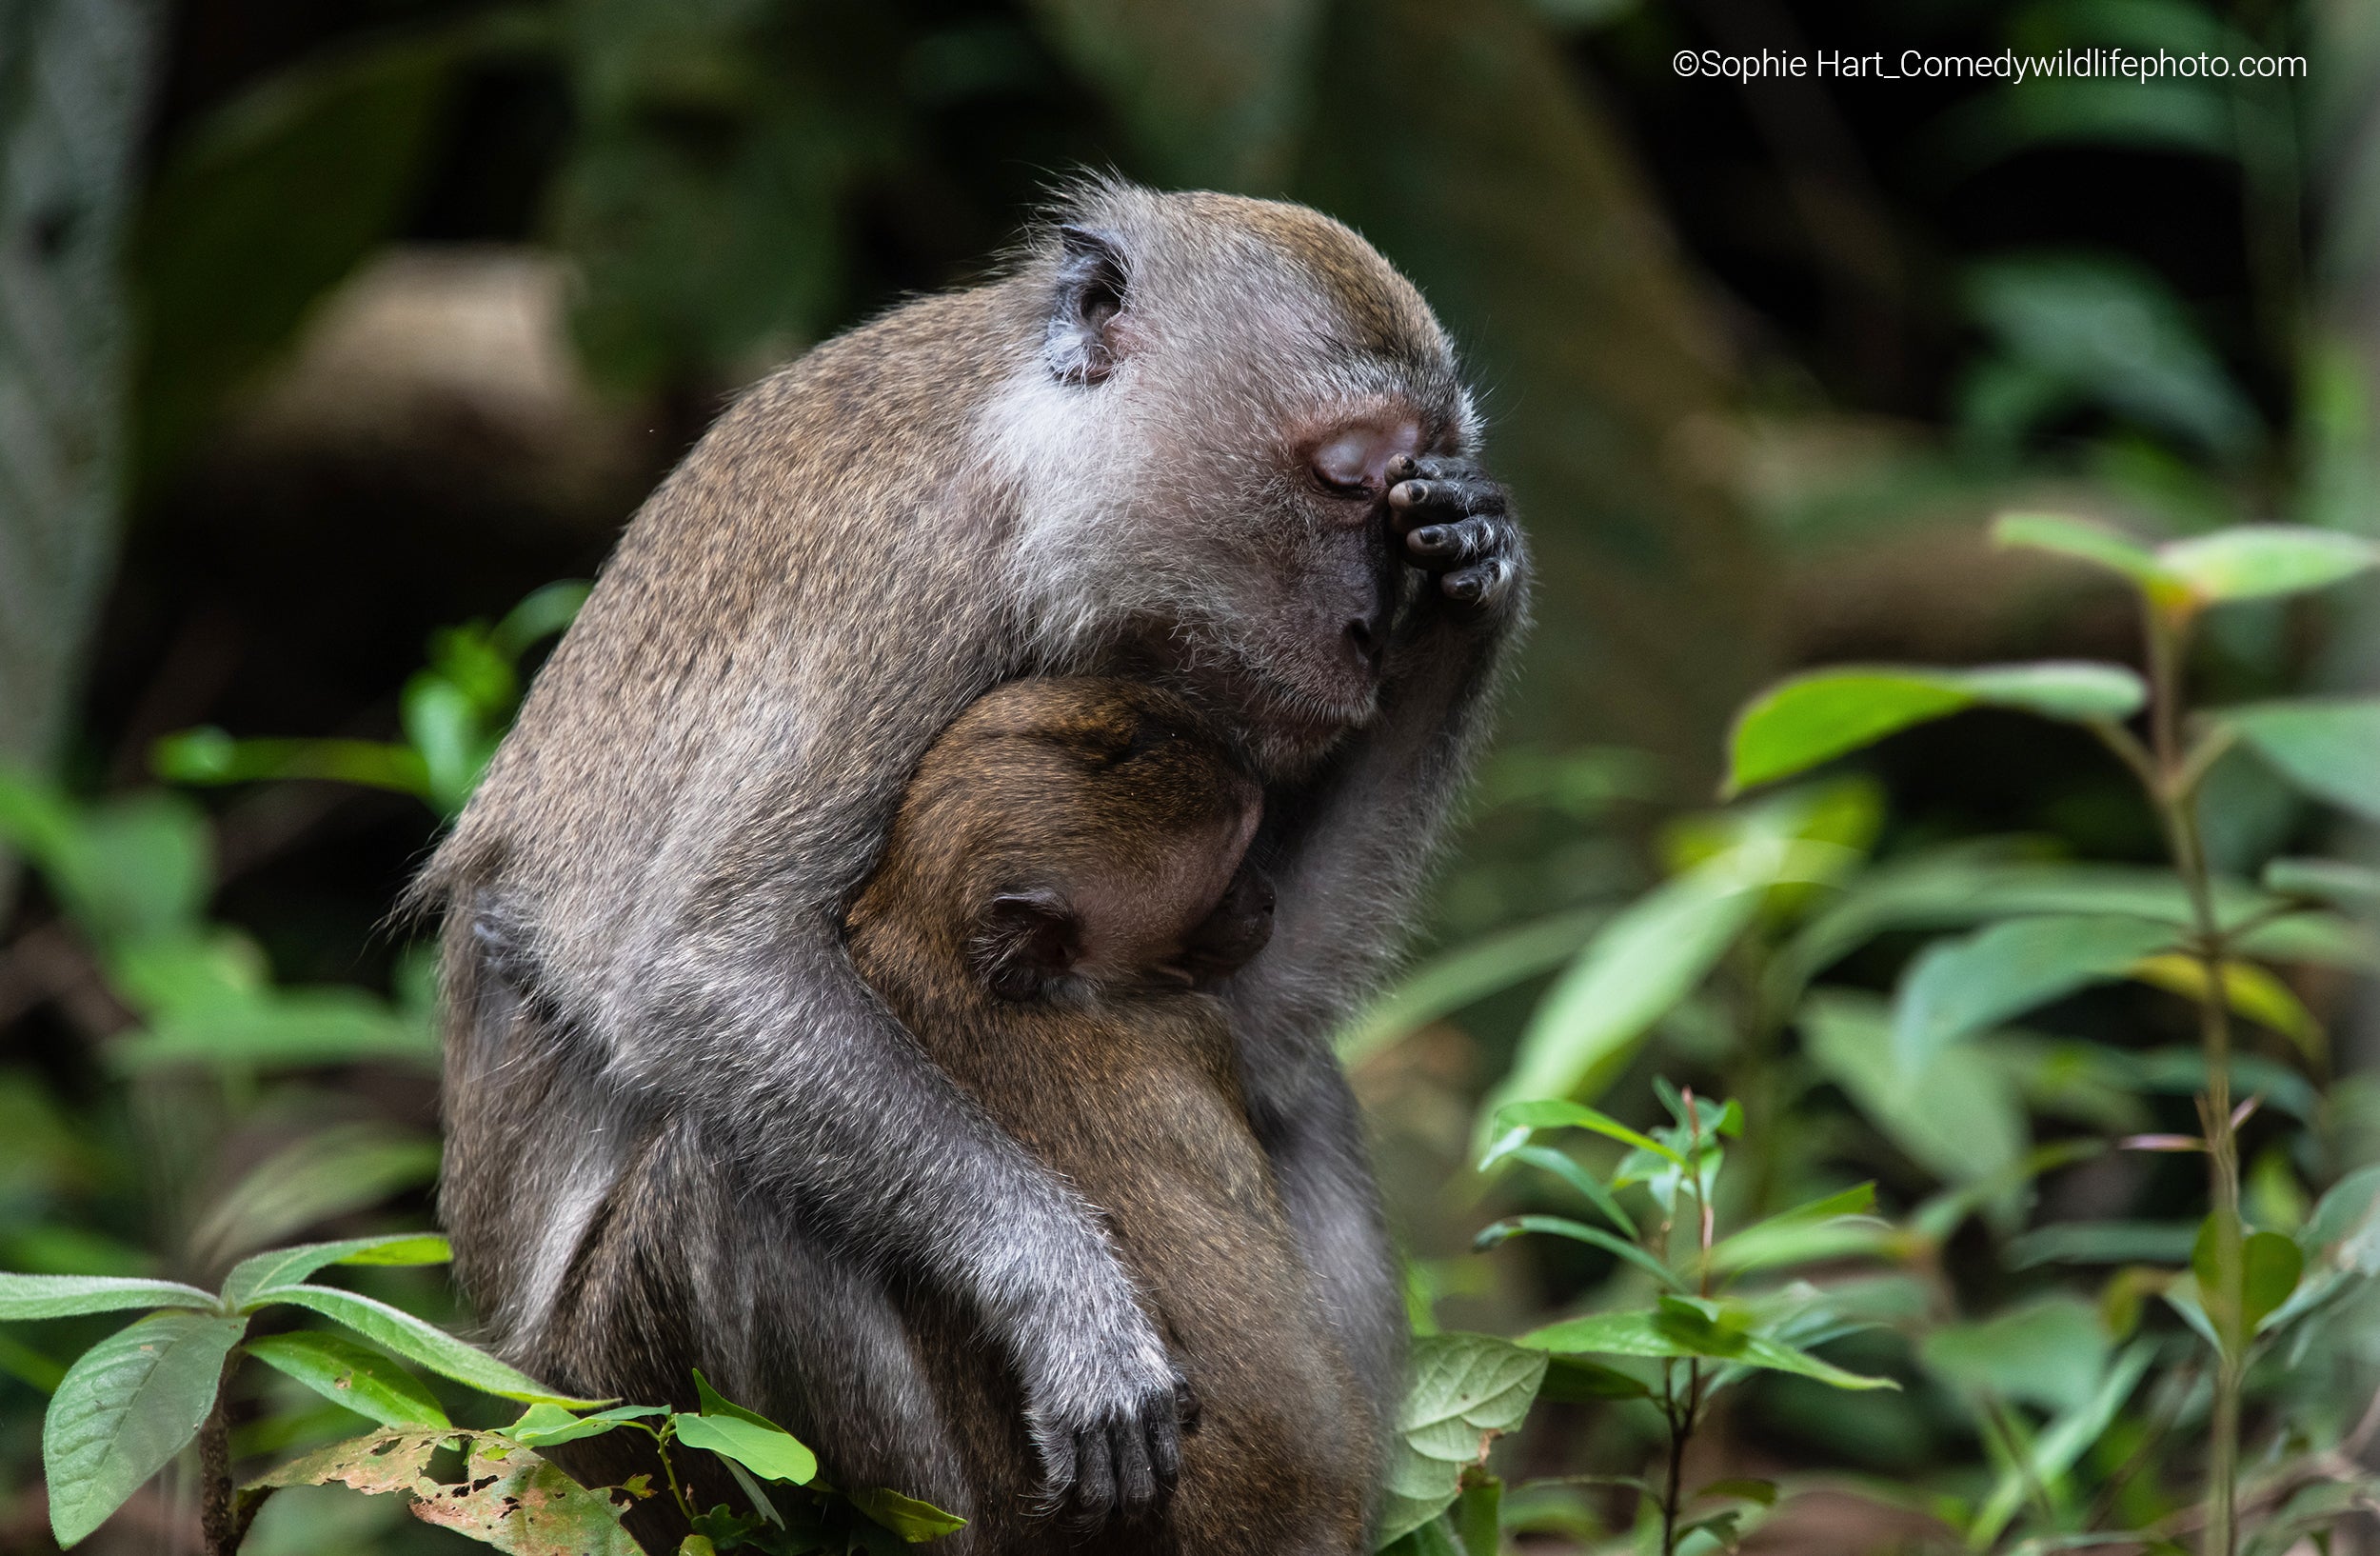 A long-tailed macaque mother appears to have had a long day. (Photo: © Sophie Hart / Comedywildlifephoto.com.)